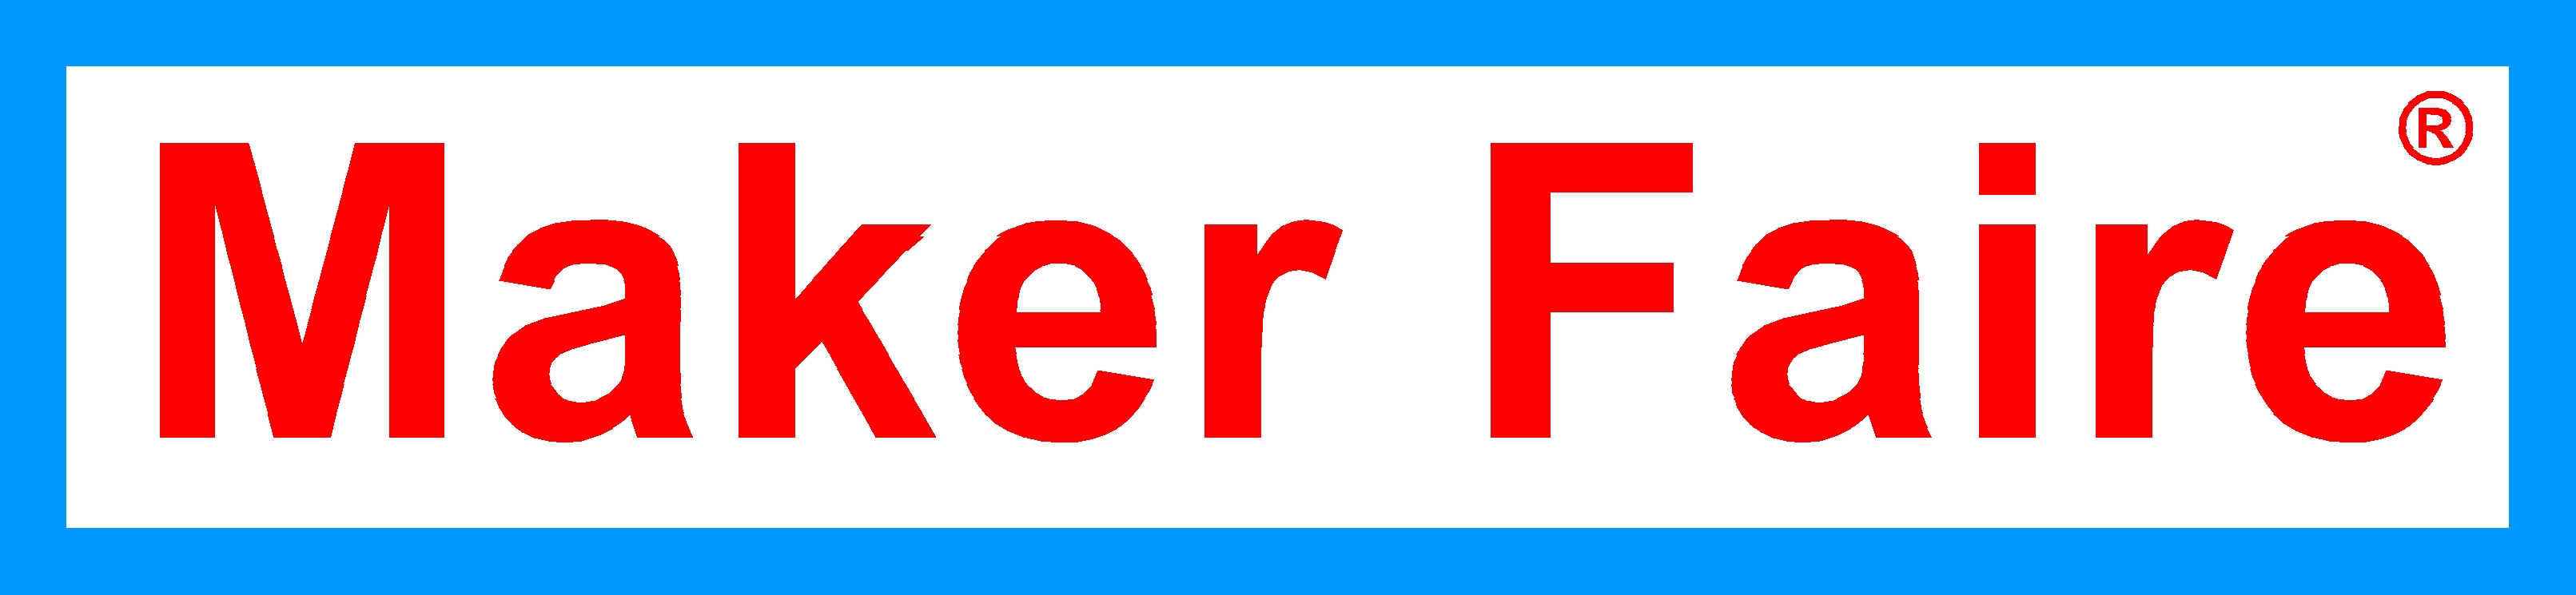 Roblox And Maker Faire Team Up For 2015 Events Roblox Blog - logo maker for roblox